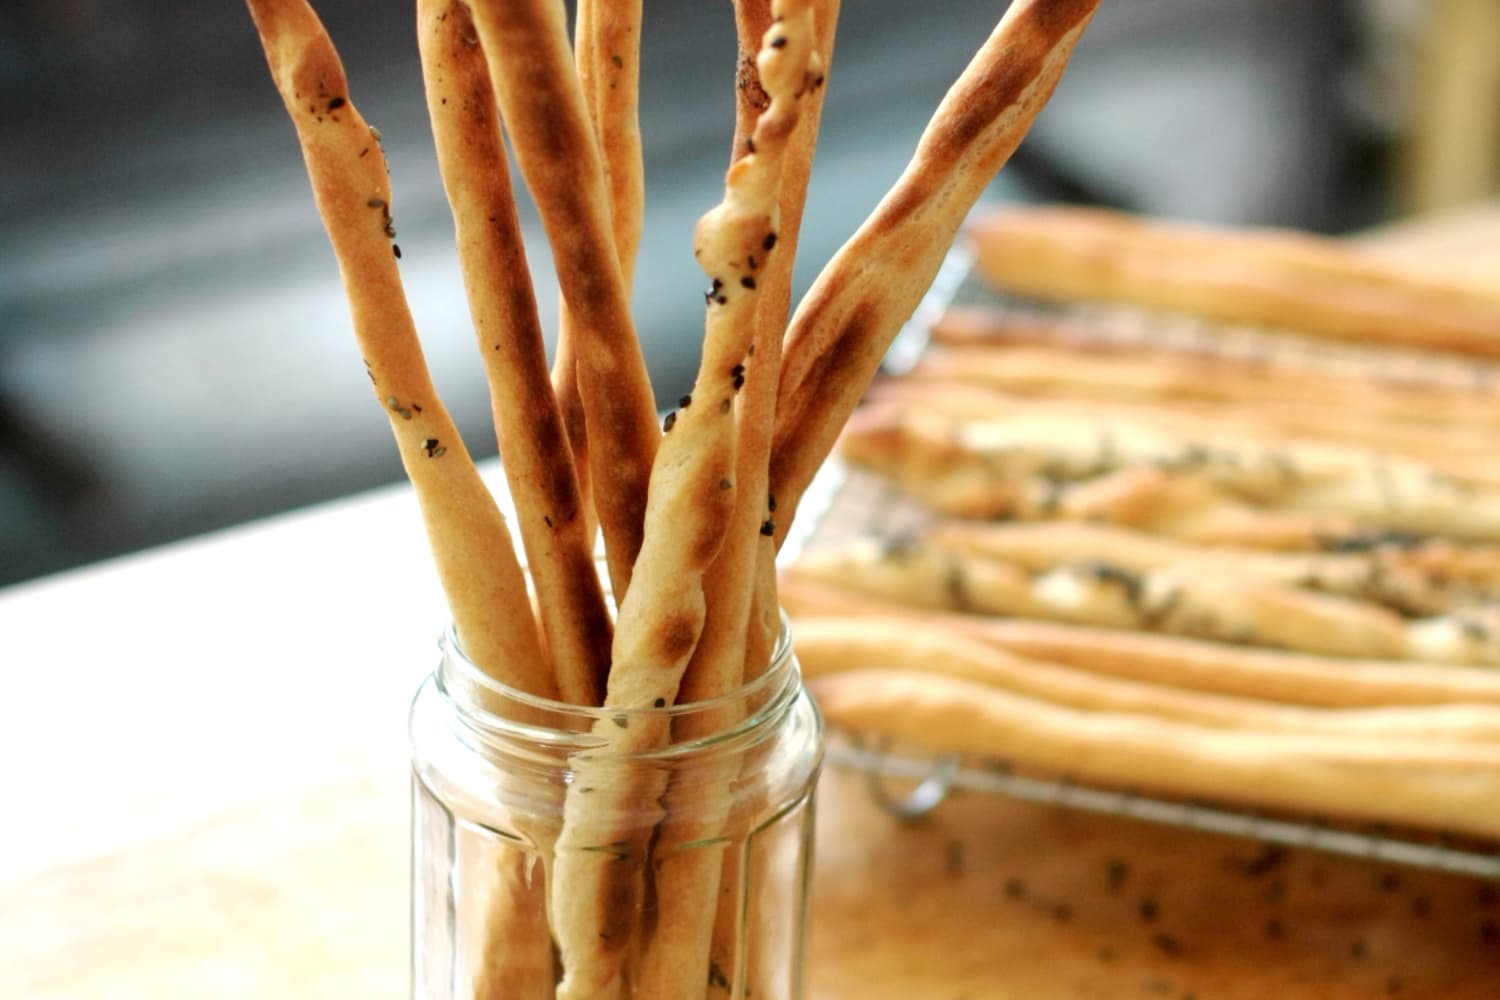 Grissini Breadsticks Recipe (With Herbs) The Fresh | Kitchn